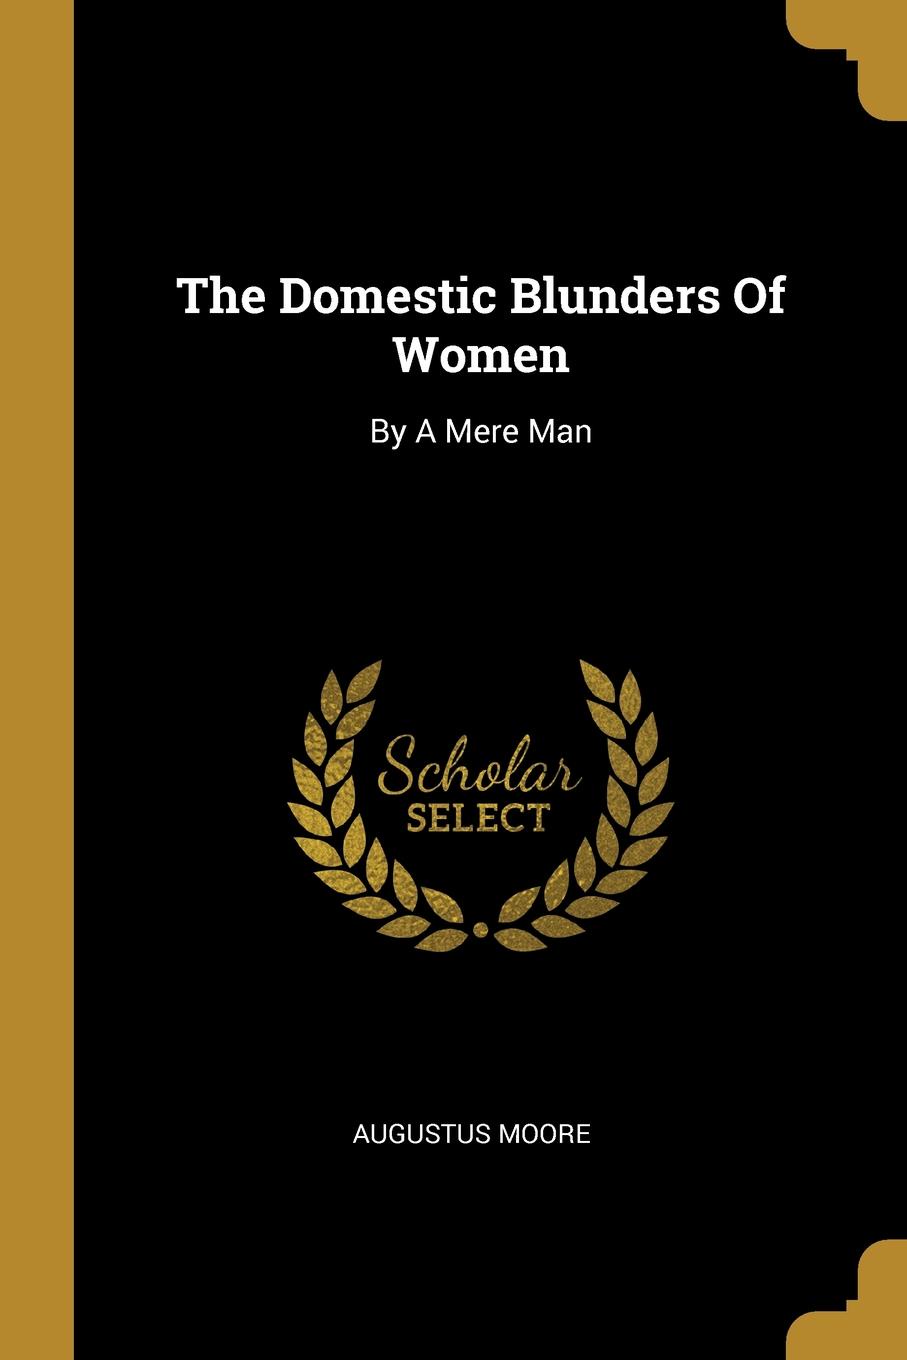 The Domestic Blunders Of Women. By A Mere Man